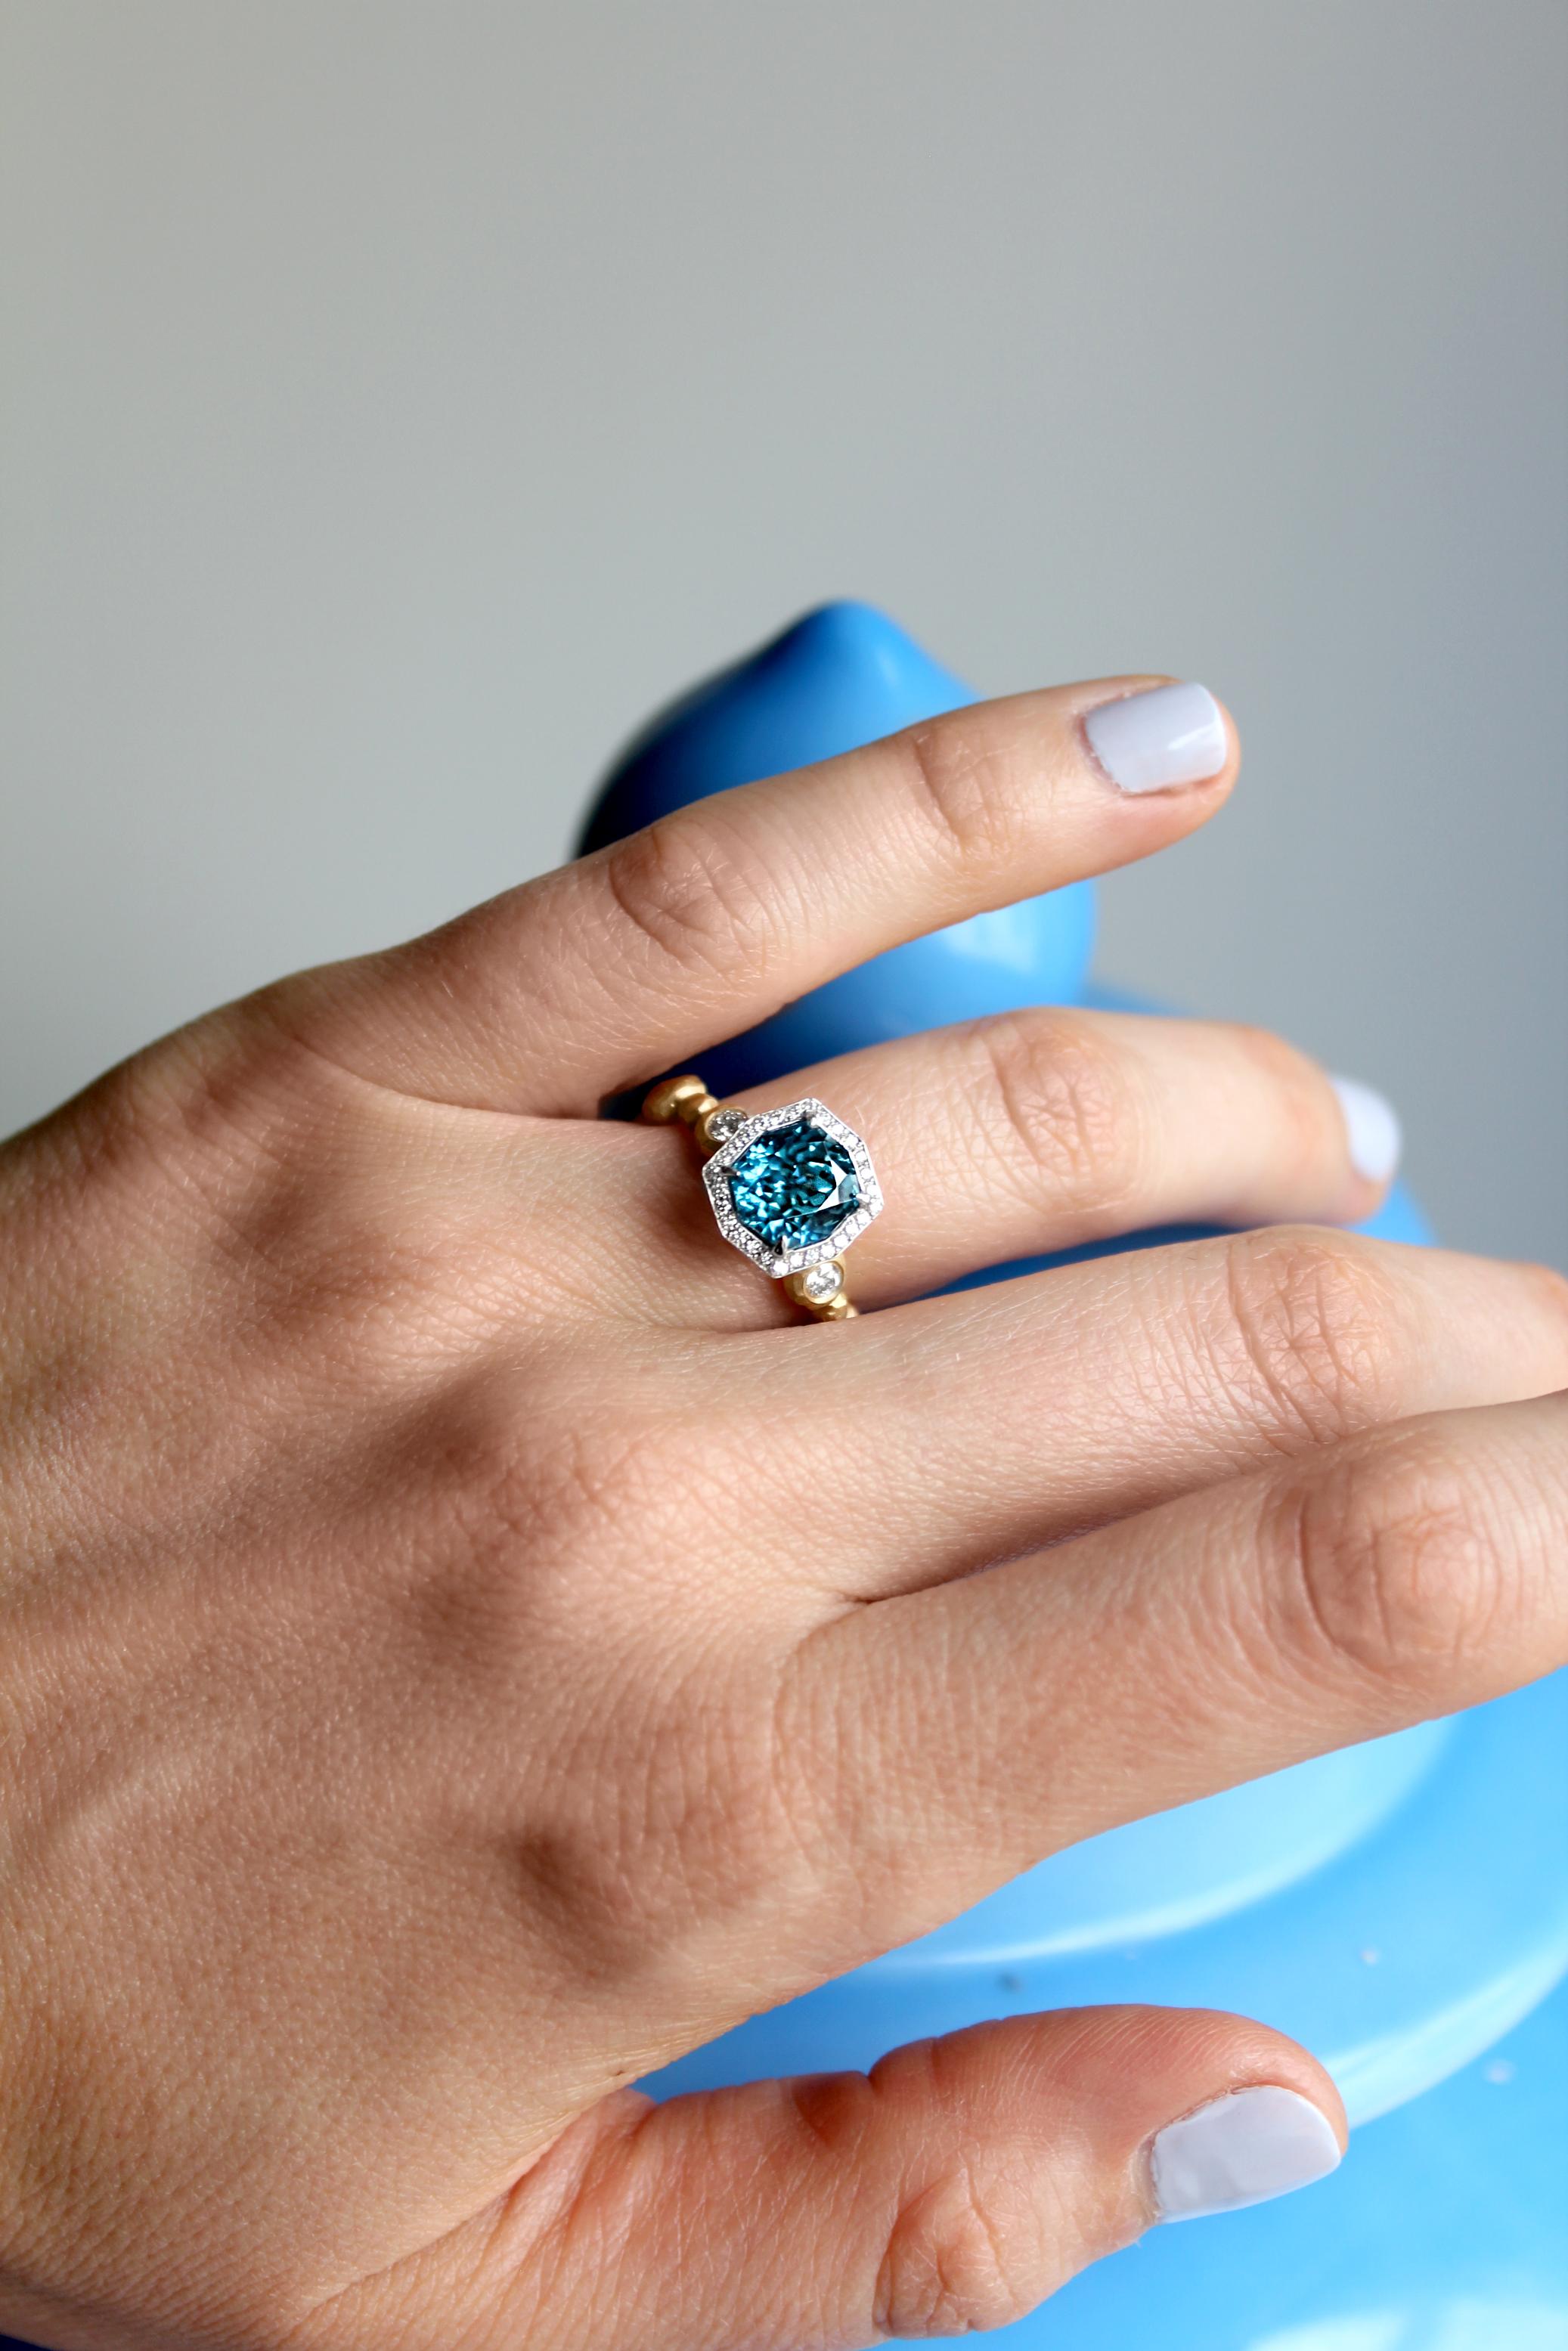 Crush Ring handcrafted by award-winning jewelry designer Pamela Froman in intricately-finished 18k yellow gold showcasing a spectacular natural 4.28 carat fancy-cut Cambodian blue zircon surrounded by a round brilliant-cut white diamond bezel in 18k